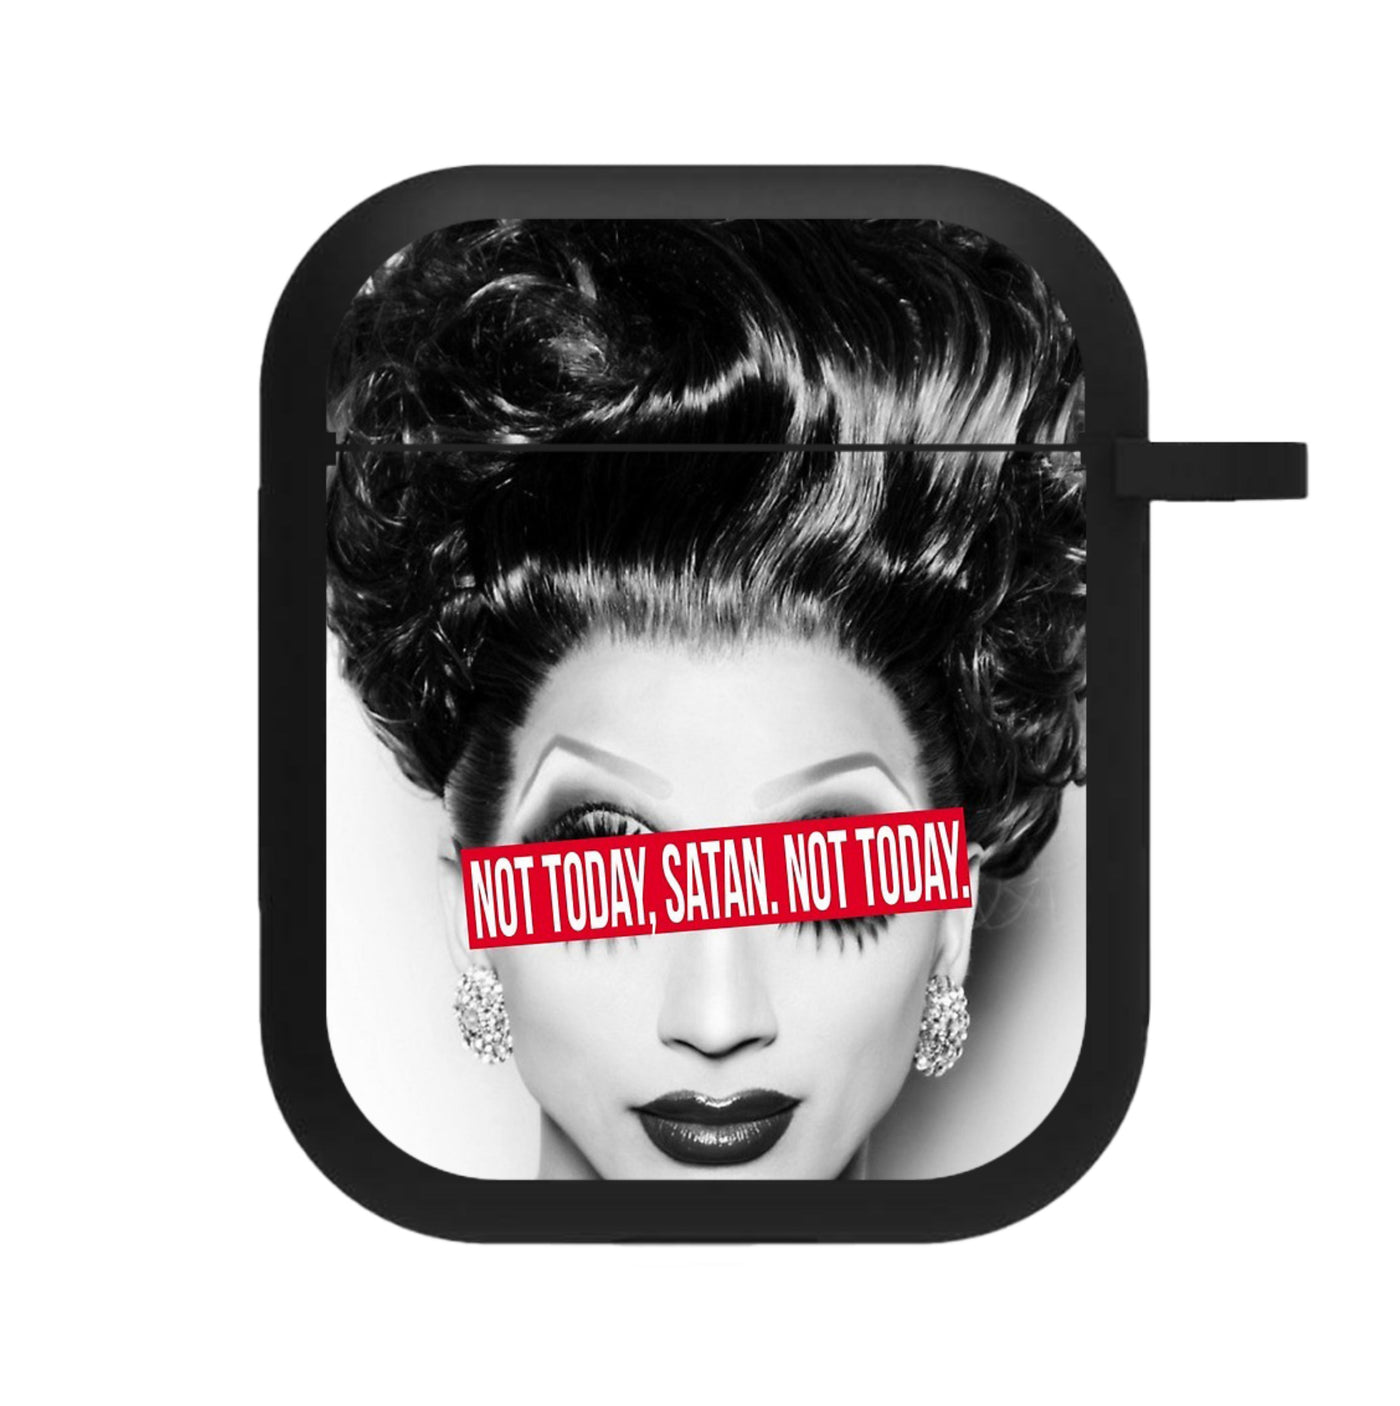 Not Today, Satan. Not Today - RuPaul's Drag Race AirPods Case